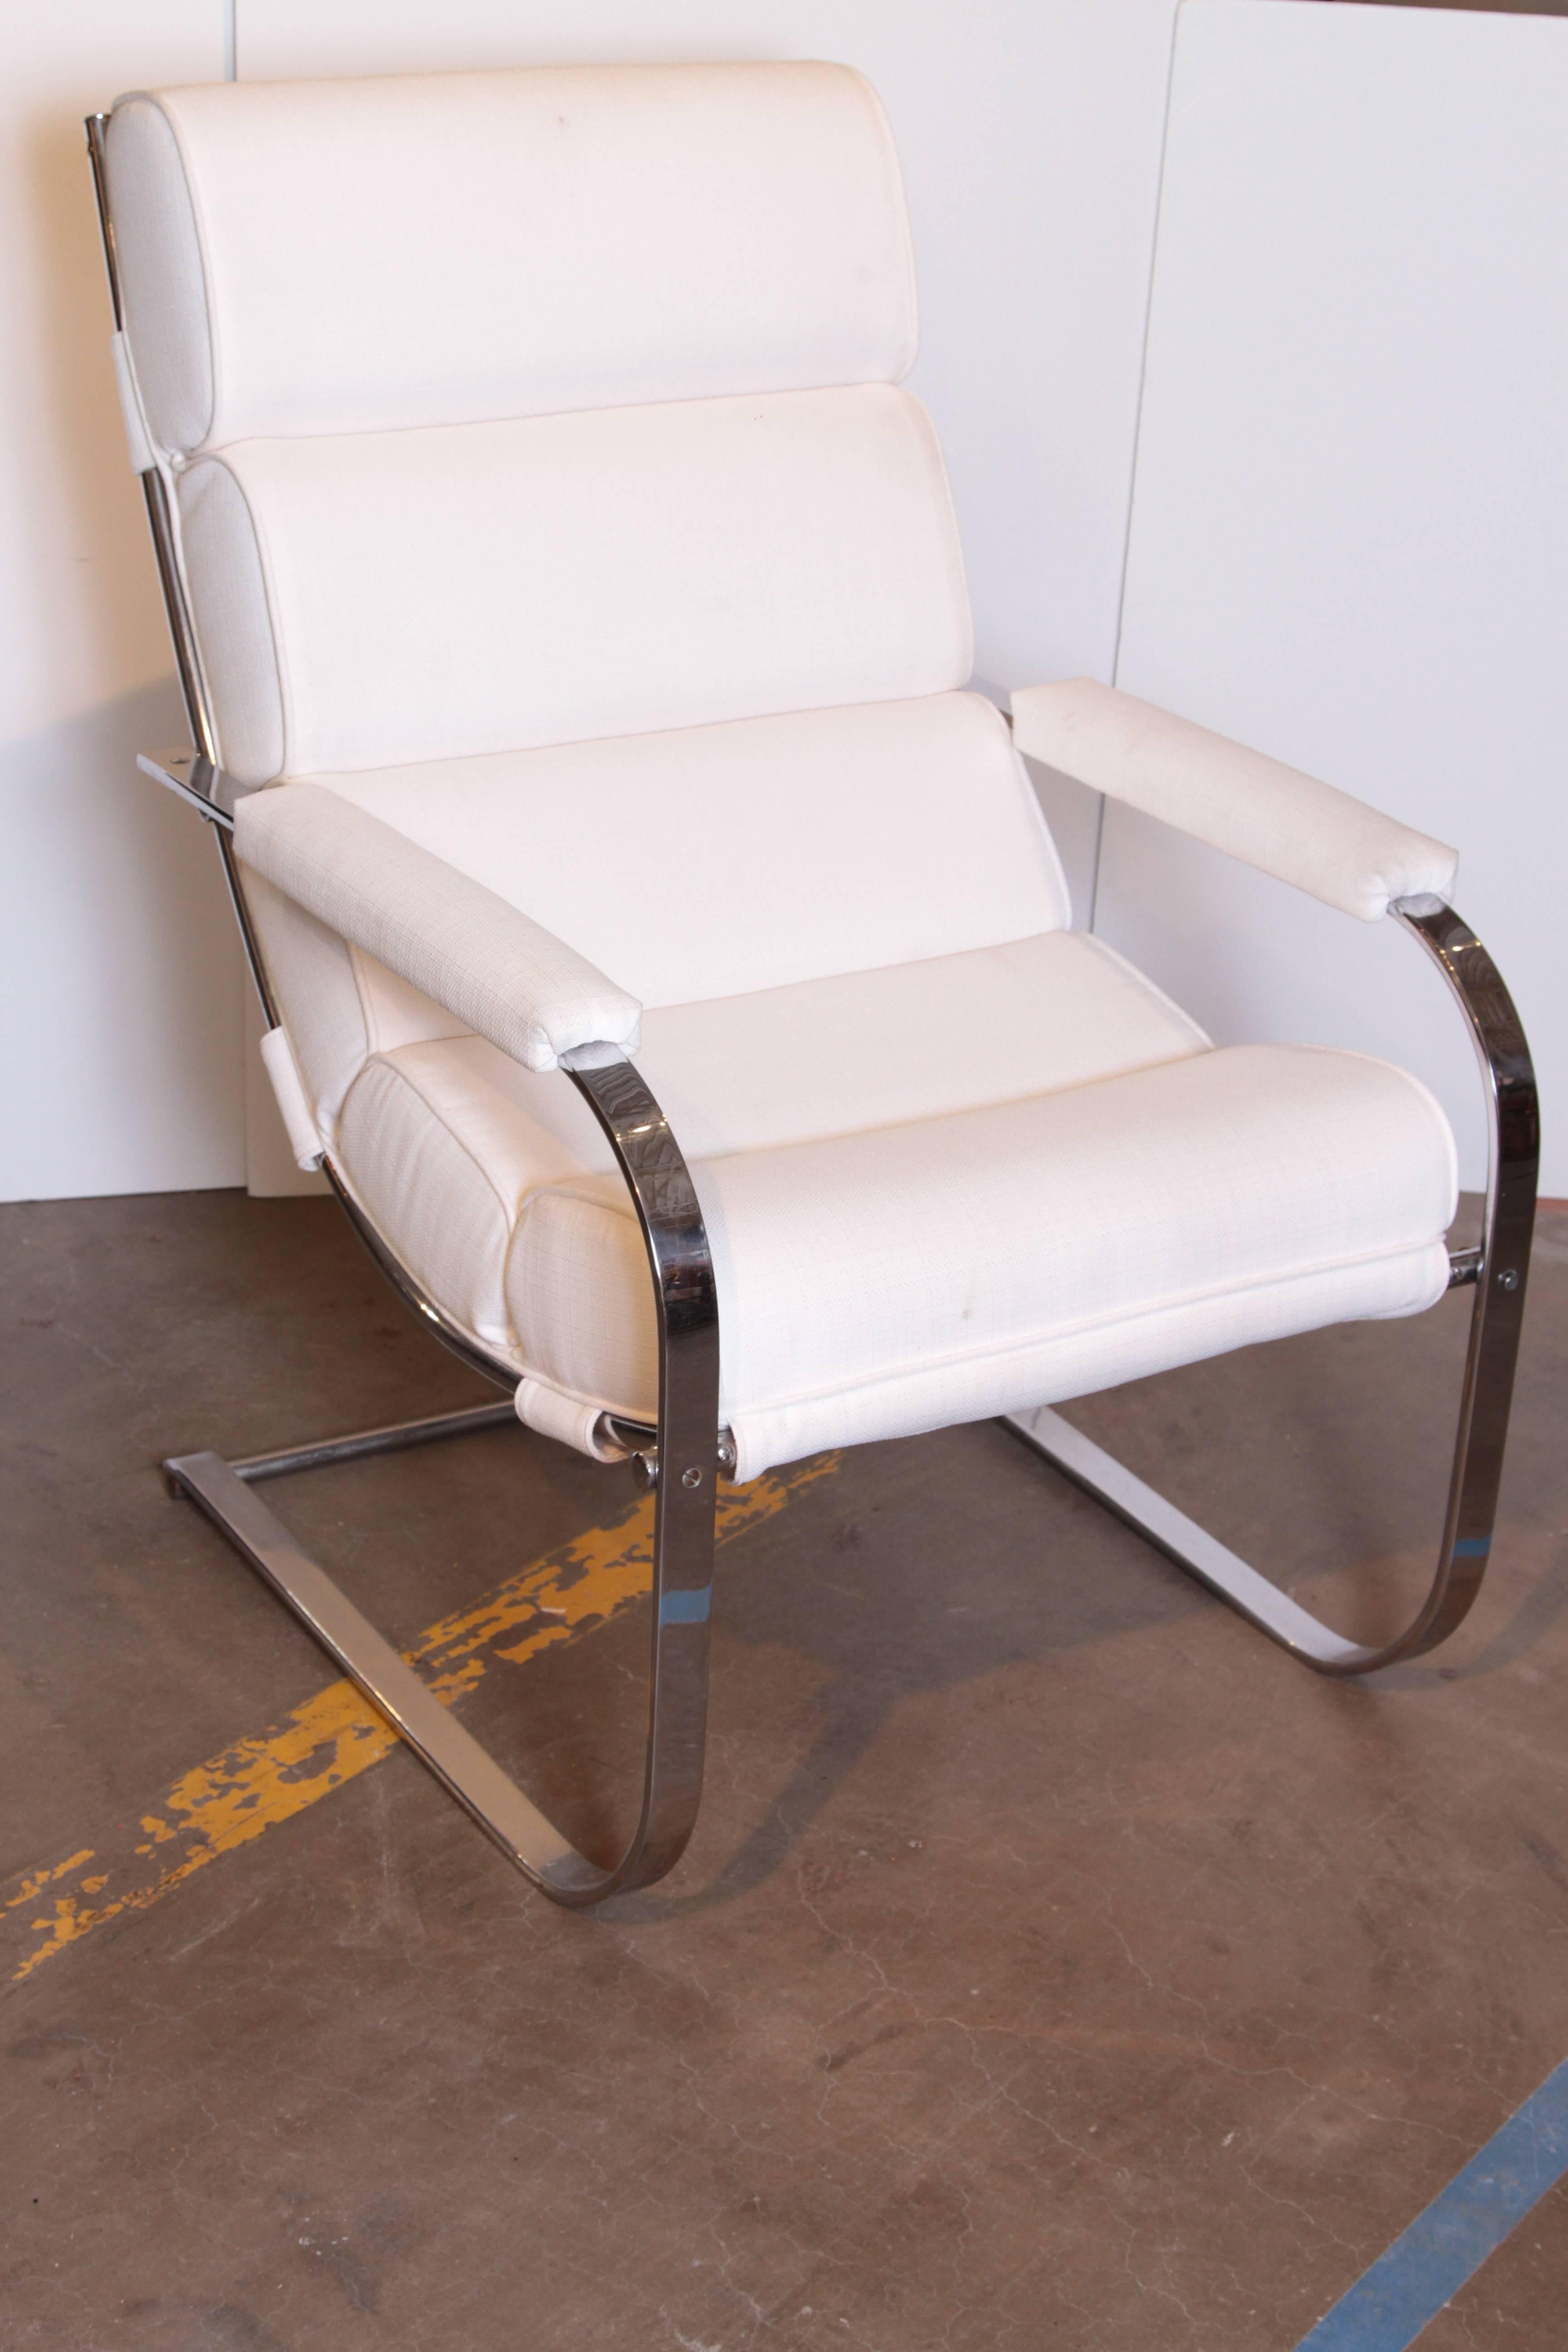 Machine Age Art Deco Gilbert Rohde for Troy sunshade flat band Springer chair

Model # 180, Spring-base chair, 1939 Troy chrome furniture
A Classic original Rohde design, with channeled pad and flat band chrome.
Pad is a high-quality redo, and